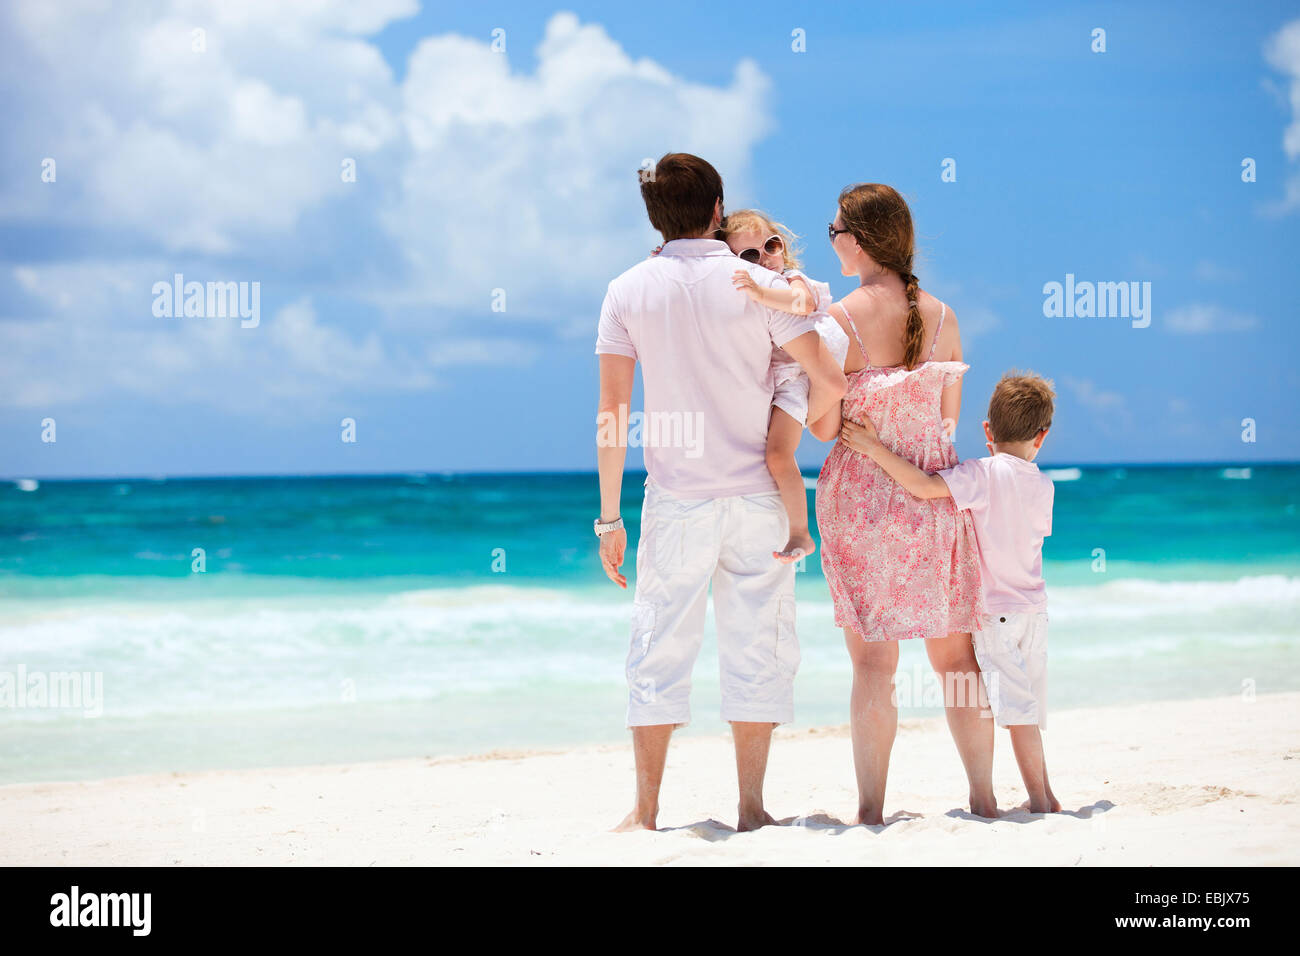 family with two children admiring the view on Caribbean beach, Mexico Stock Photo